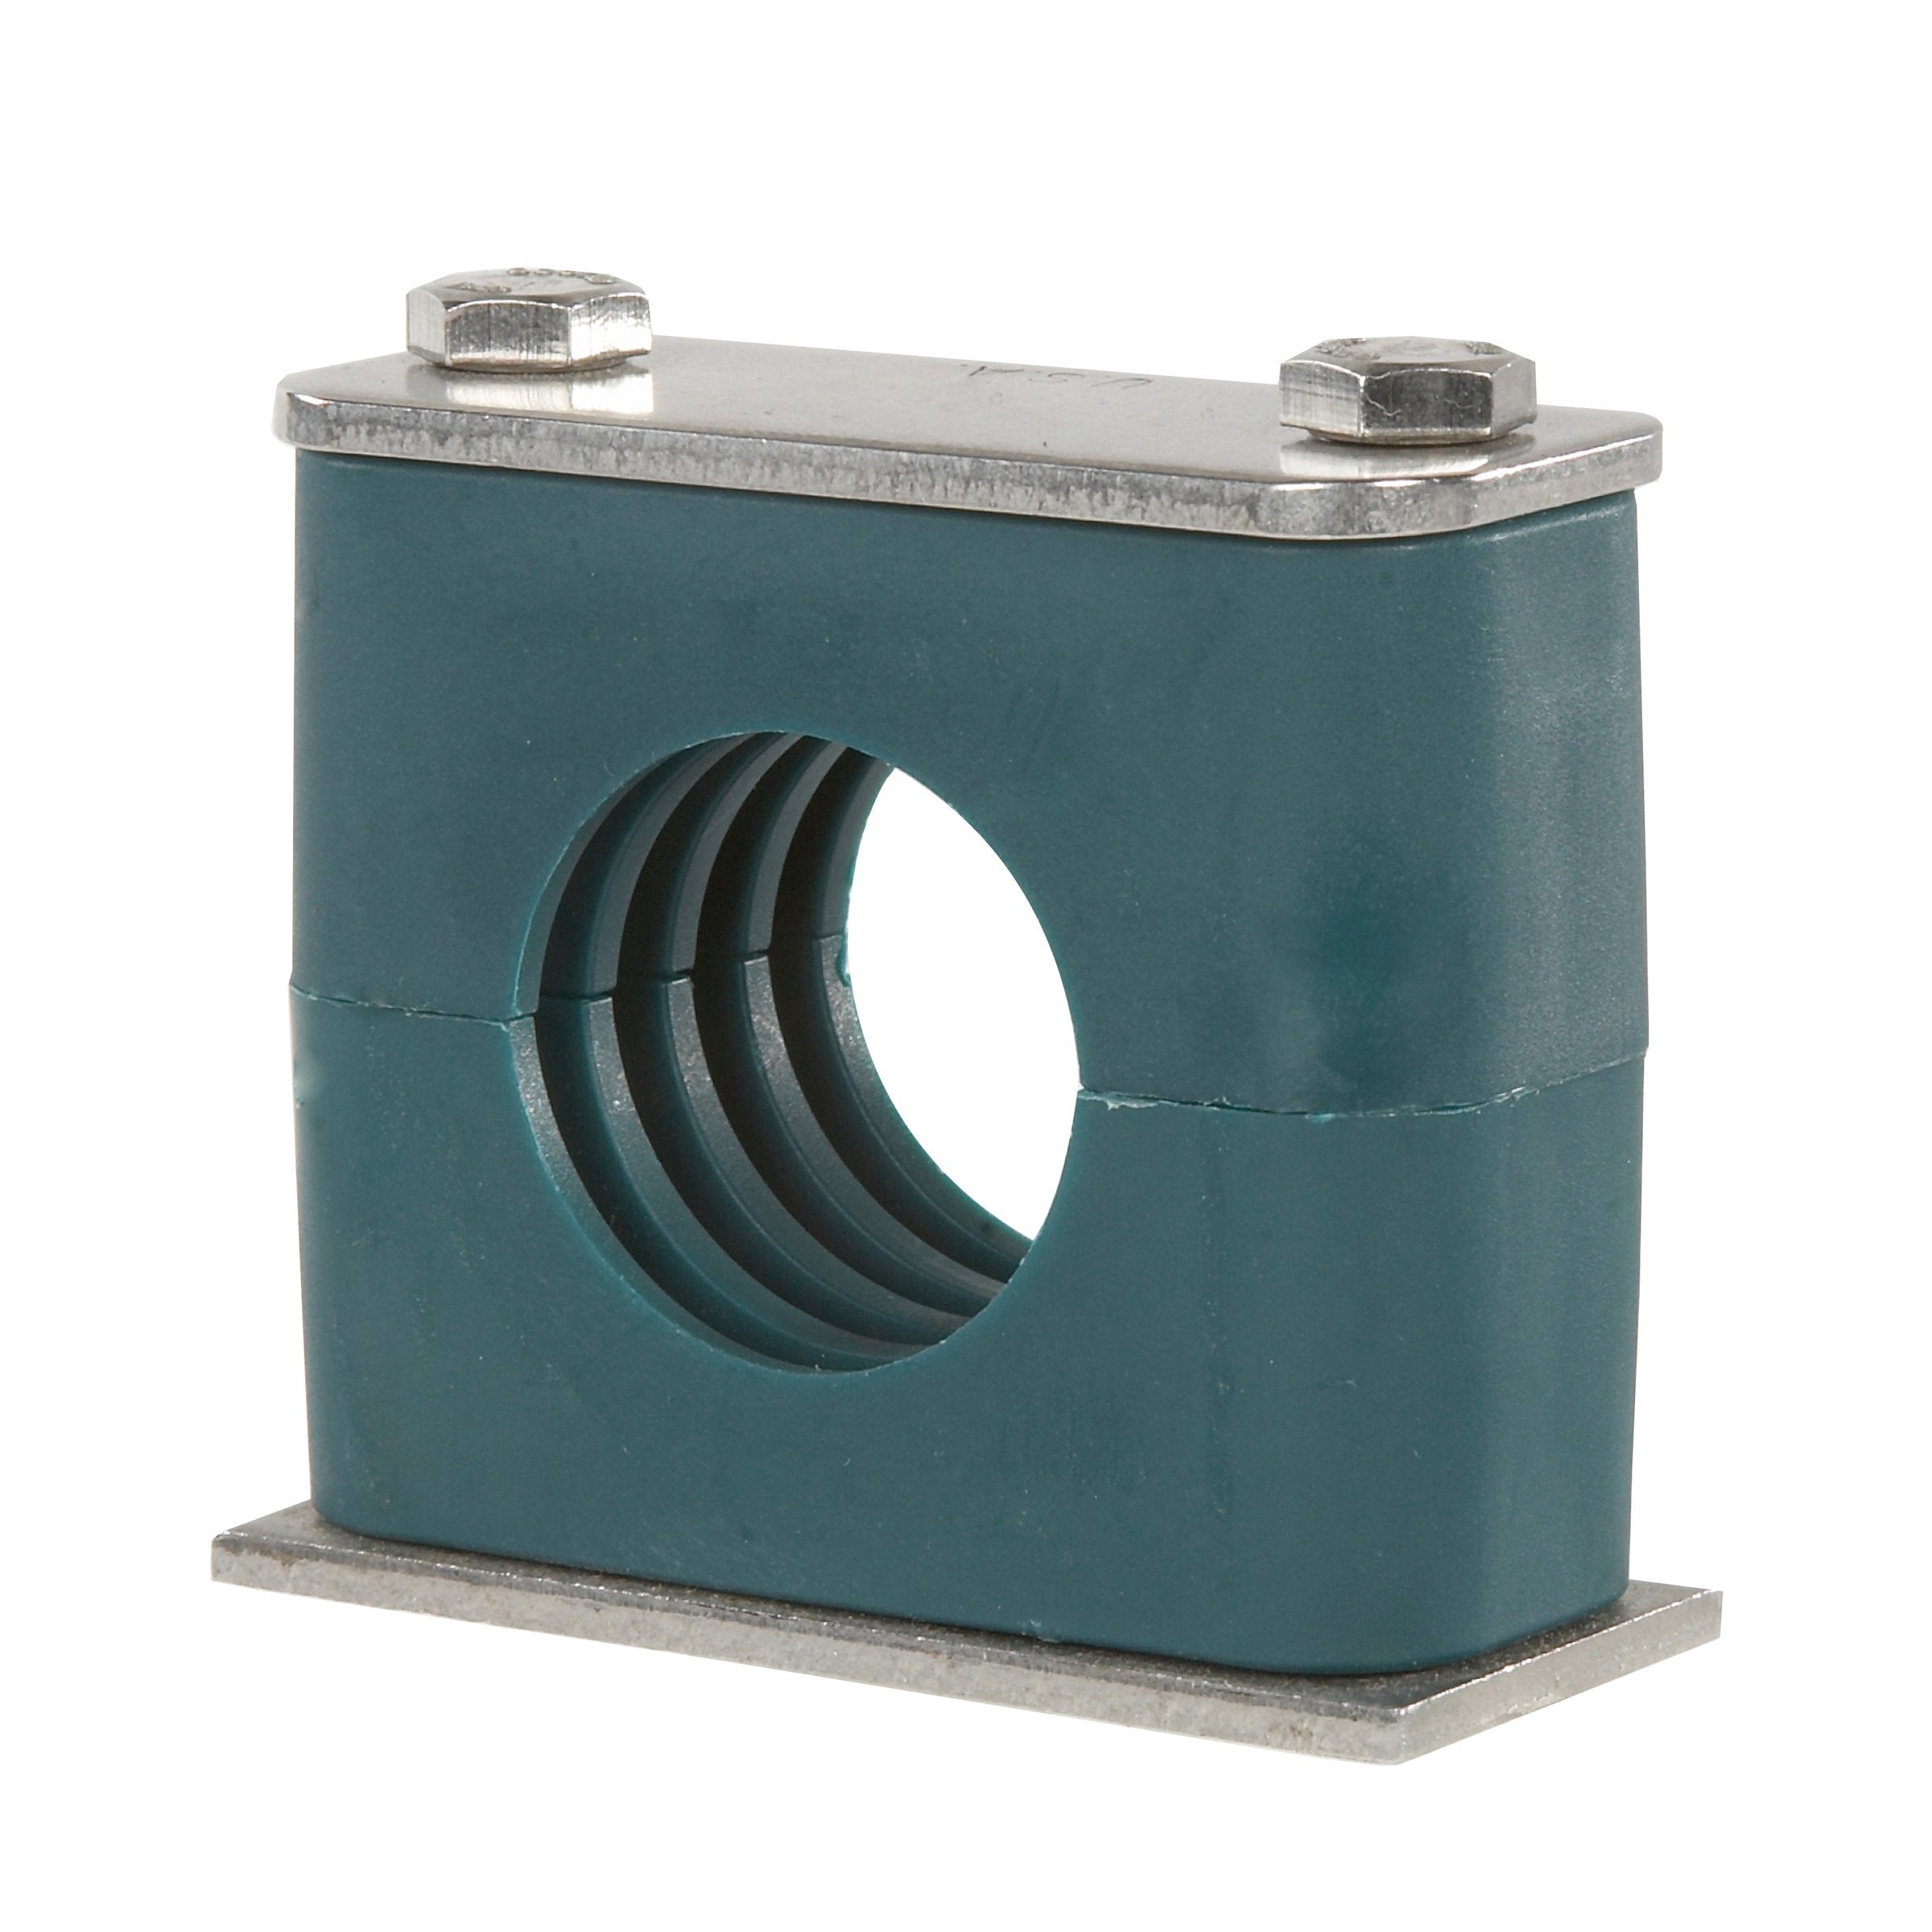 SP-648.3-PP-DP-AS-U-W10 : Stauff Clamp, Single Weld Plate, 1.9" (48.3mm) OD, for 1.5" Pipe, Green PP Insert, Profiled Interior, Carbon Steel